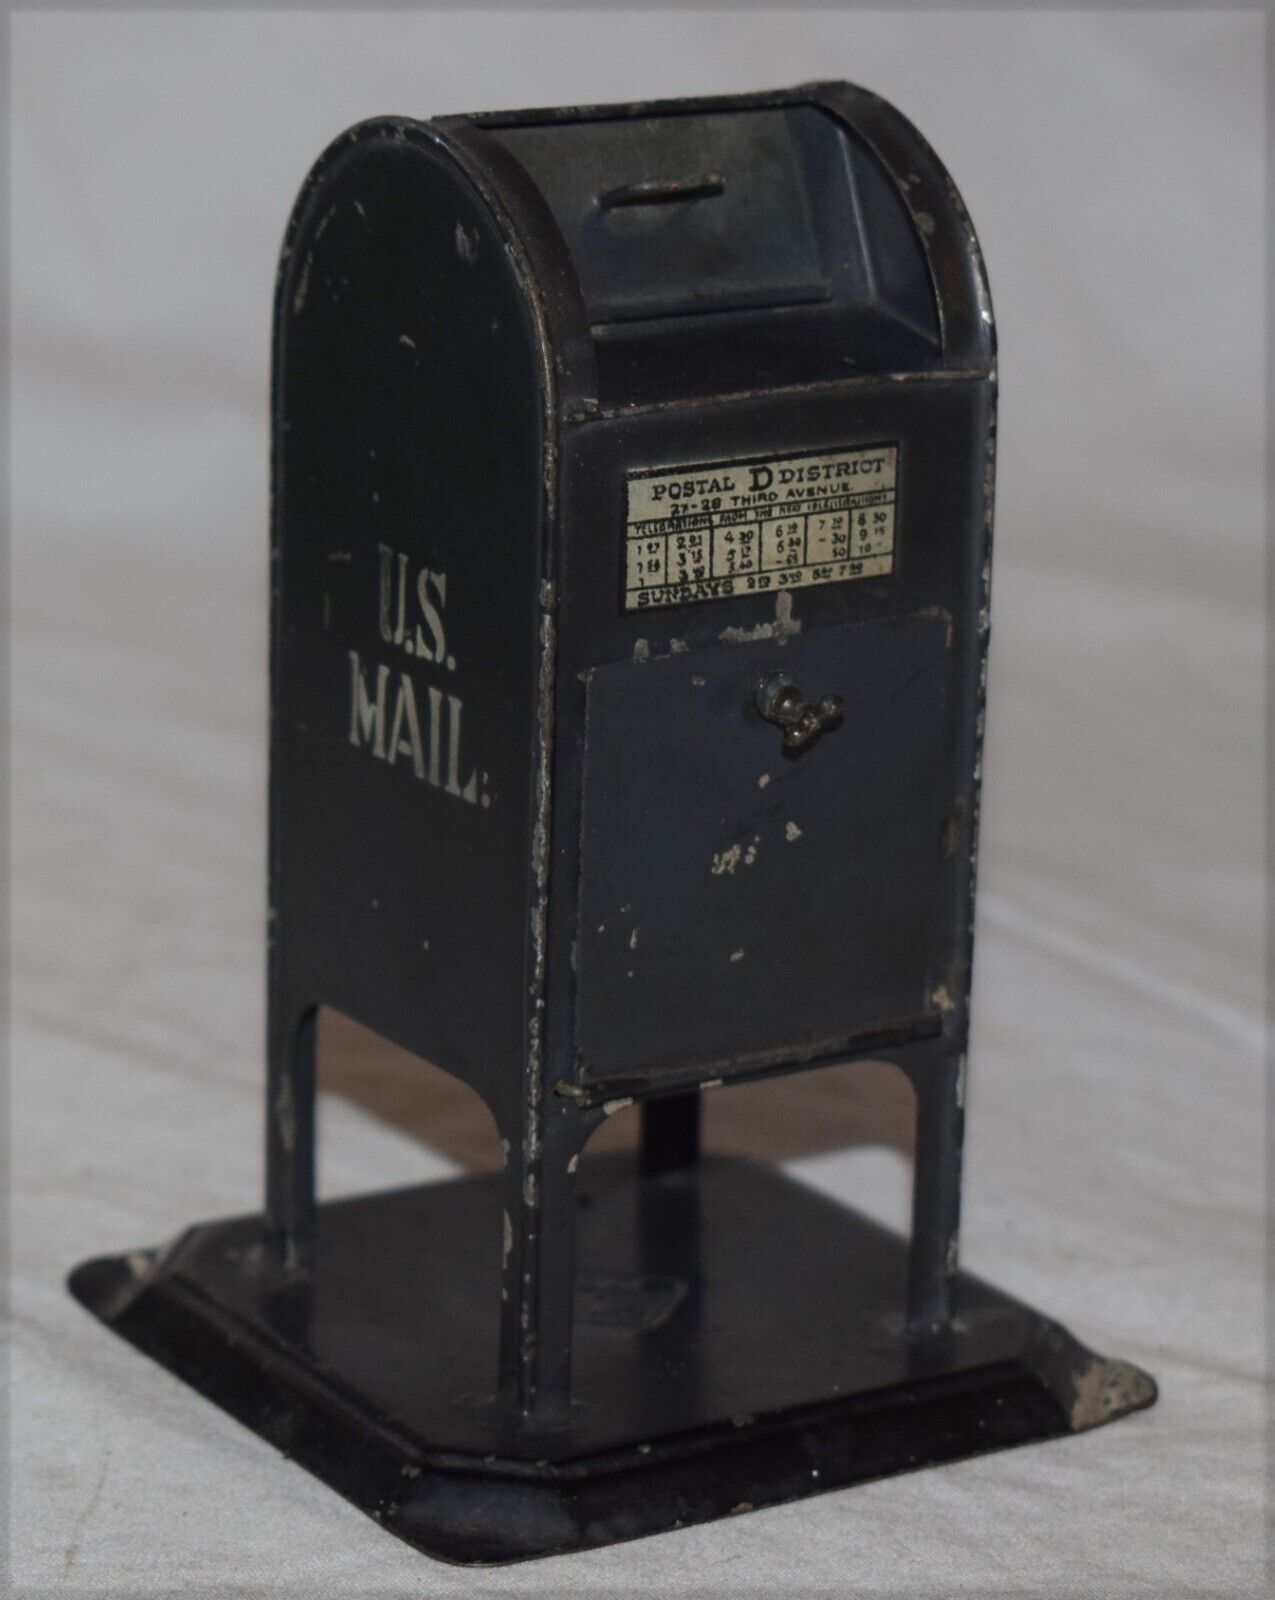 Vintage Bing US Mail Coin Bank - Tin - Germany